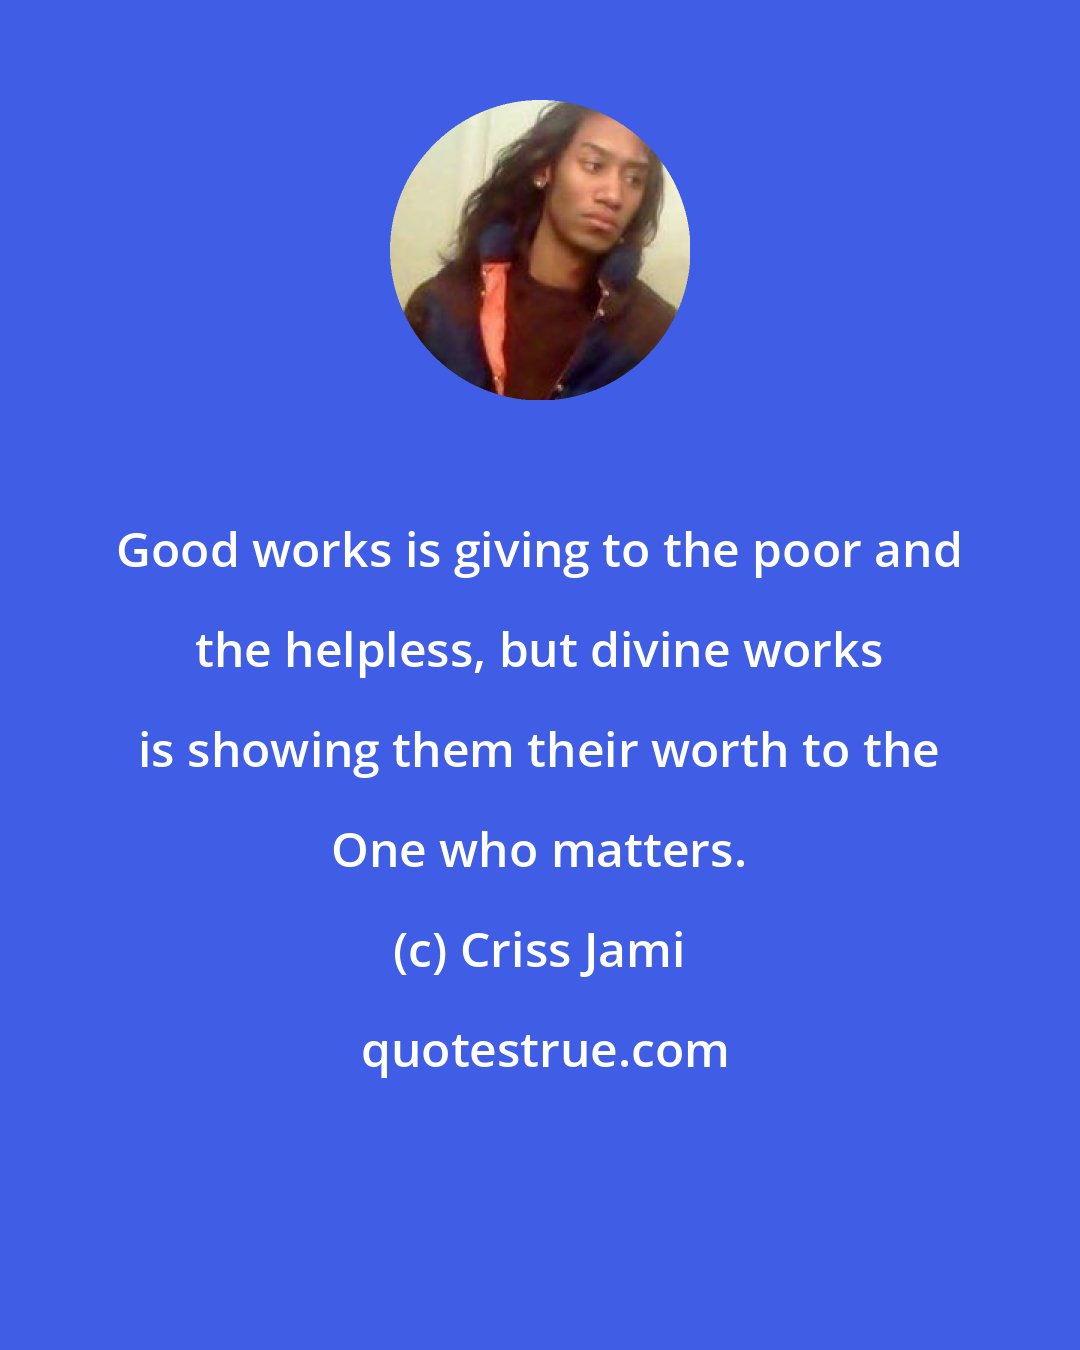 Criss Jami: Good works is giving to the poor and the helpless, but divine works is showing them their worth to the One who matters.